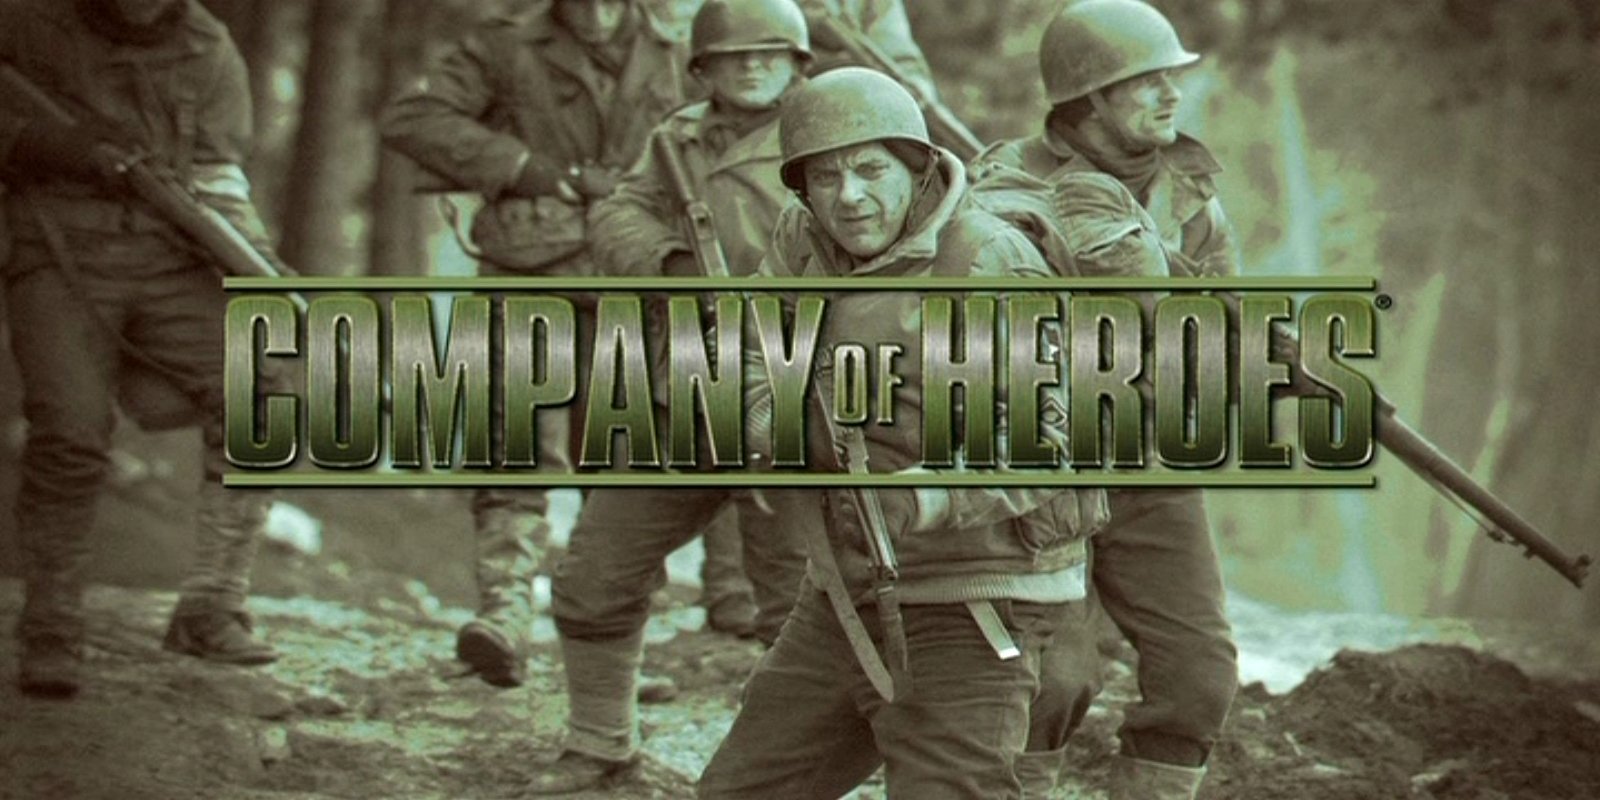 company of heroes wallpaper,action adventure game,soldier,adventure game,font,adaptation